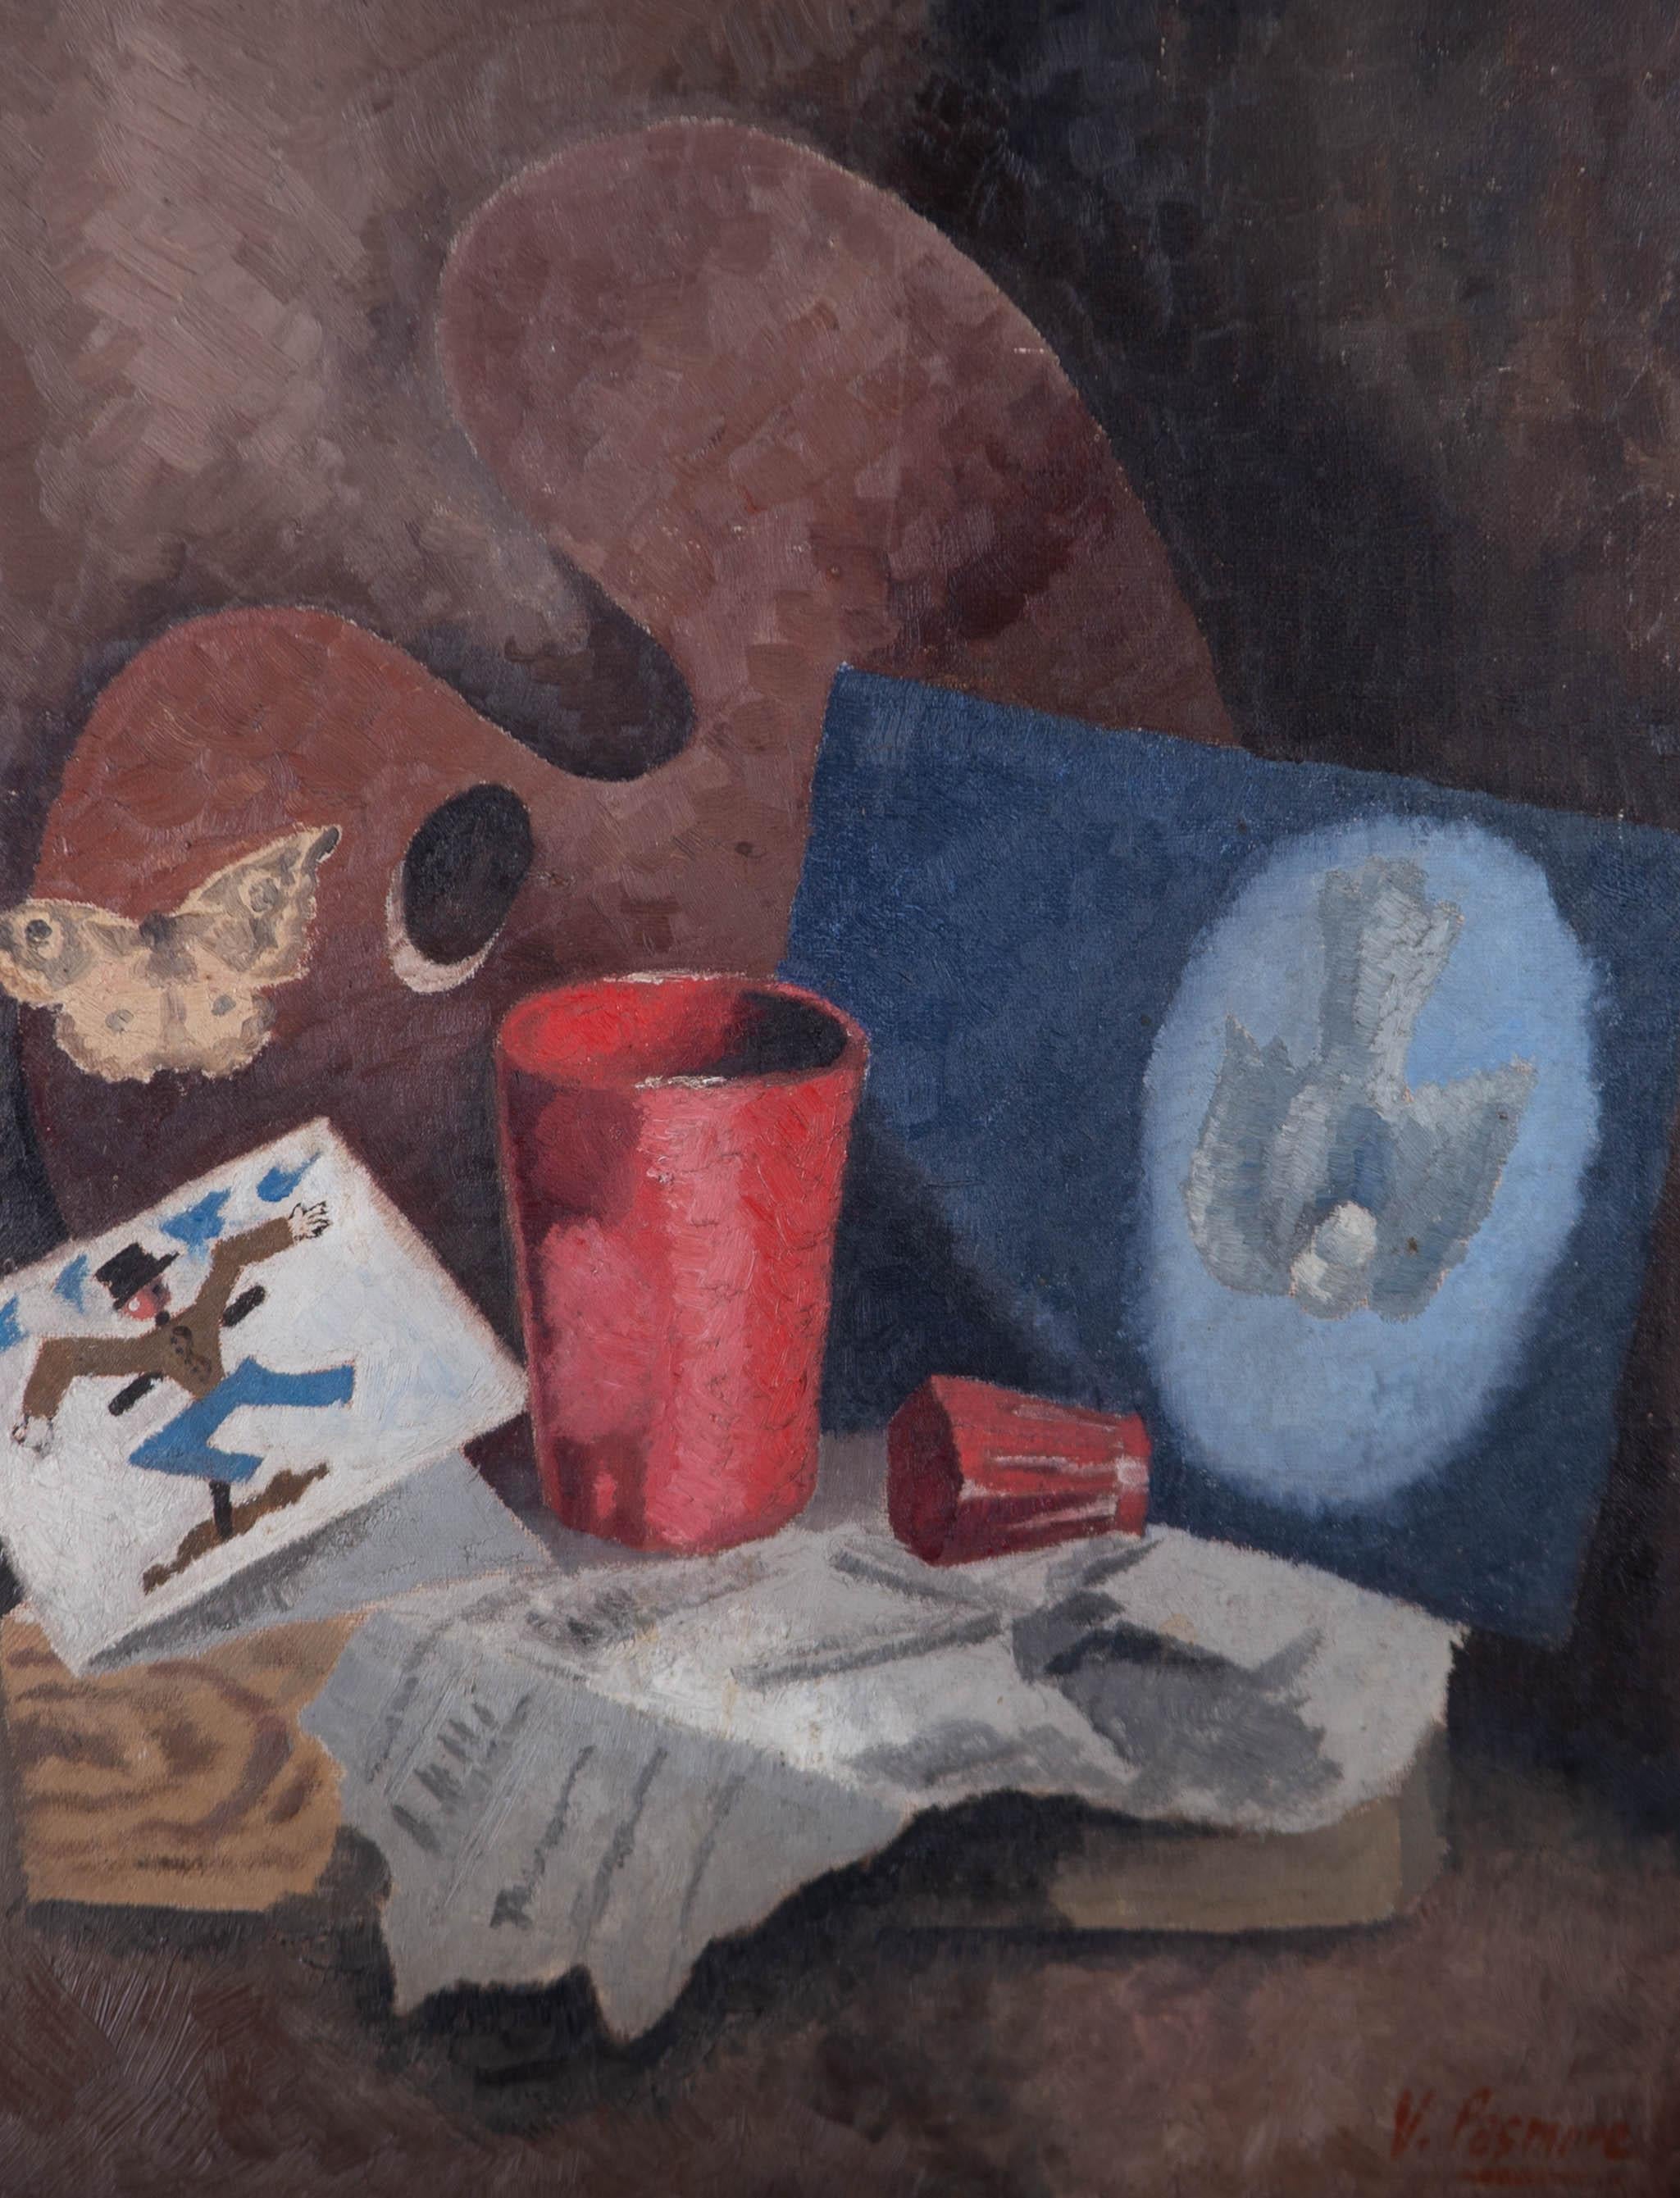 A truly fantastic still life in the style of the influential 20thC painter and architect, Victor Pasmore. The style, colour palette and themes match those of Pasmore's in the mid 1940s, shortly before his break into purely abstracted works. The